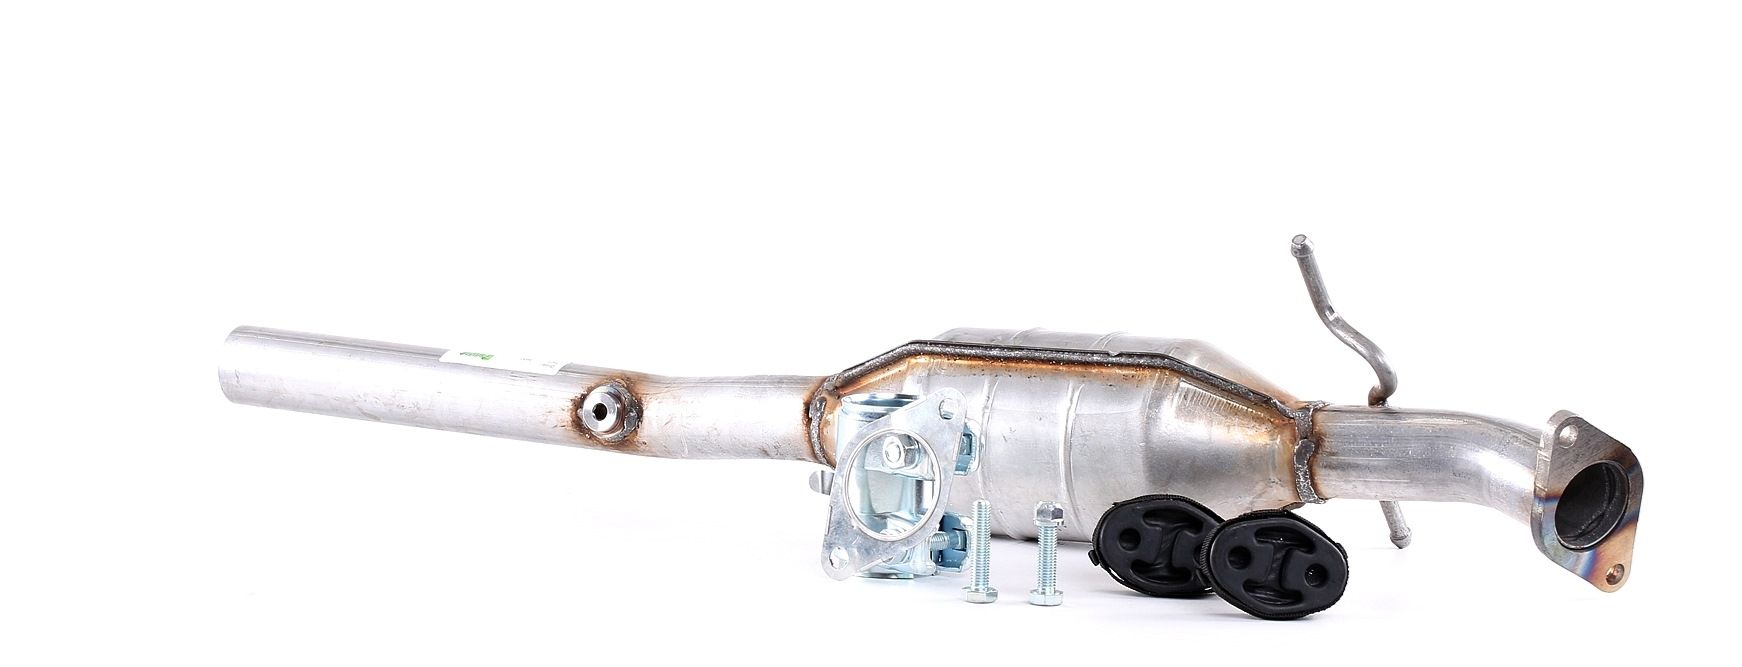 WALKER 20307 Catalytic converter 92, with mounting parts, Length: 870 mm